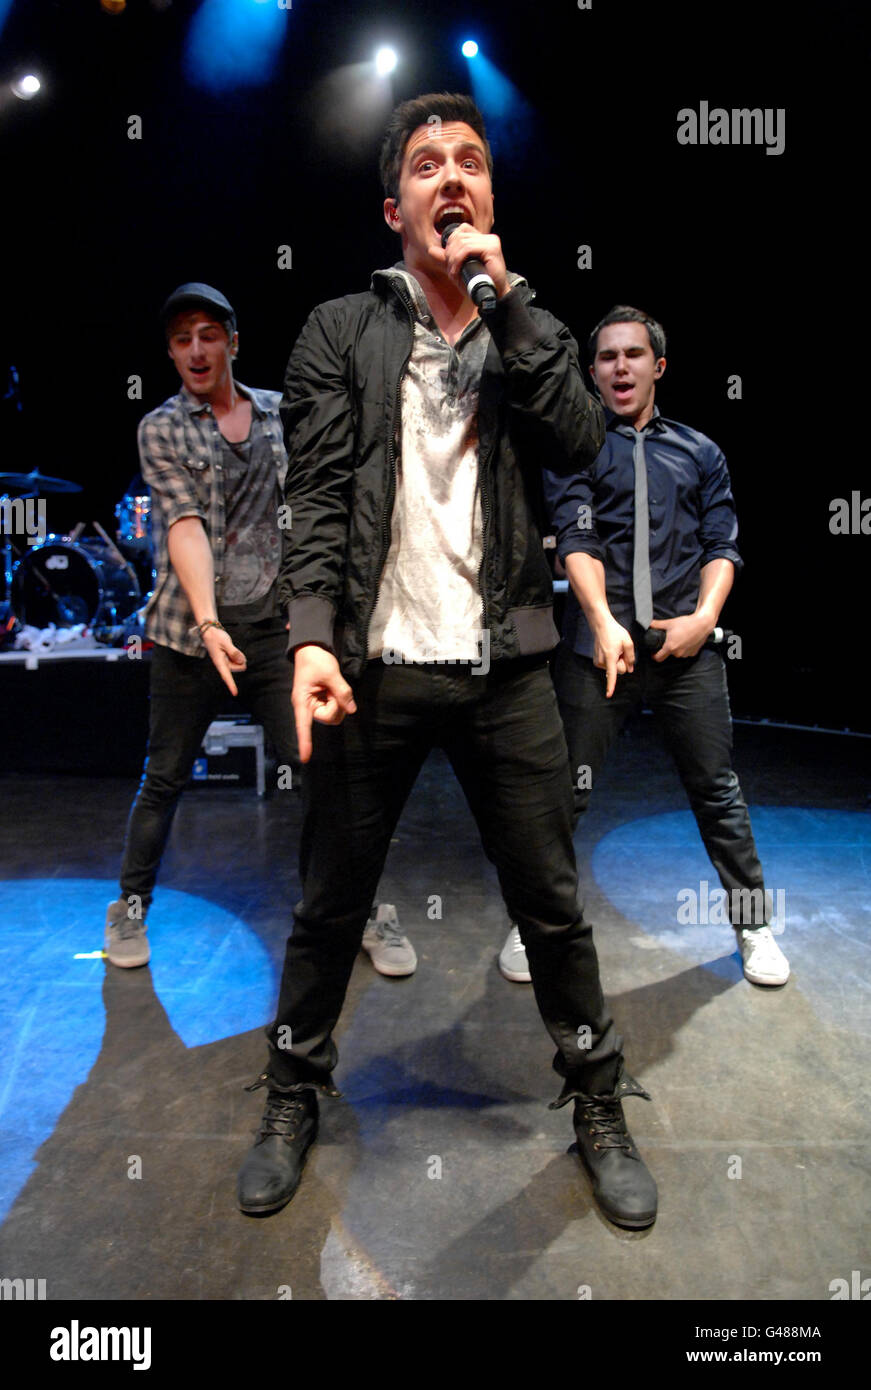 Big Time Rush (from left to right) Kendall Schmidt, Logan Henderson and Carlos Pena, perform on stage at Shepherd's Bush Empire in west London. Stock Photo